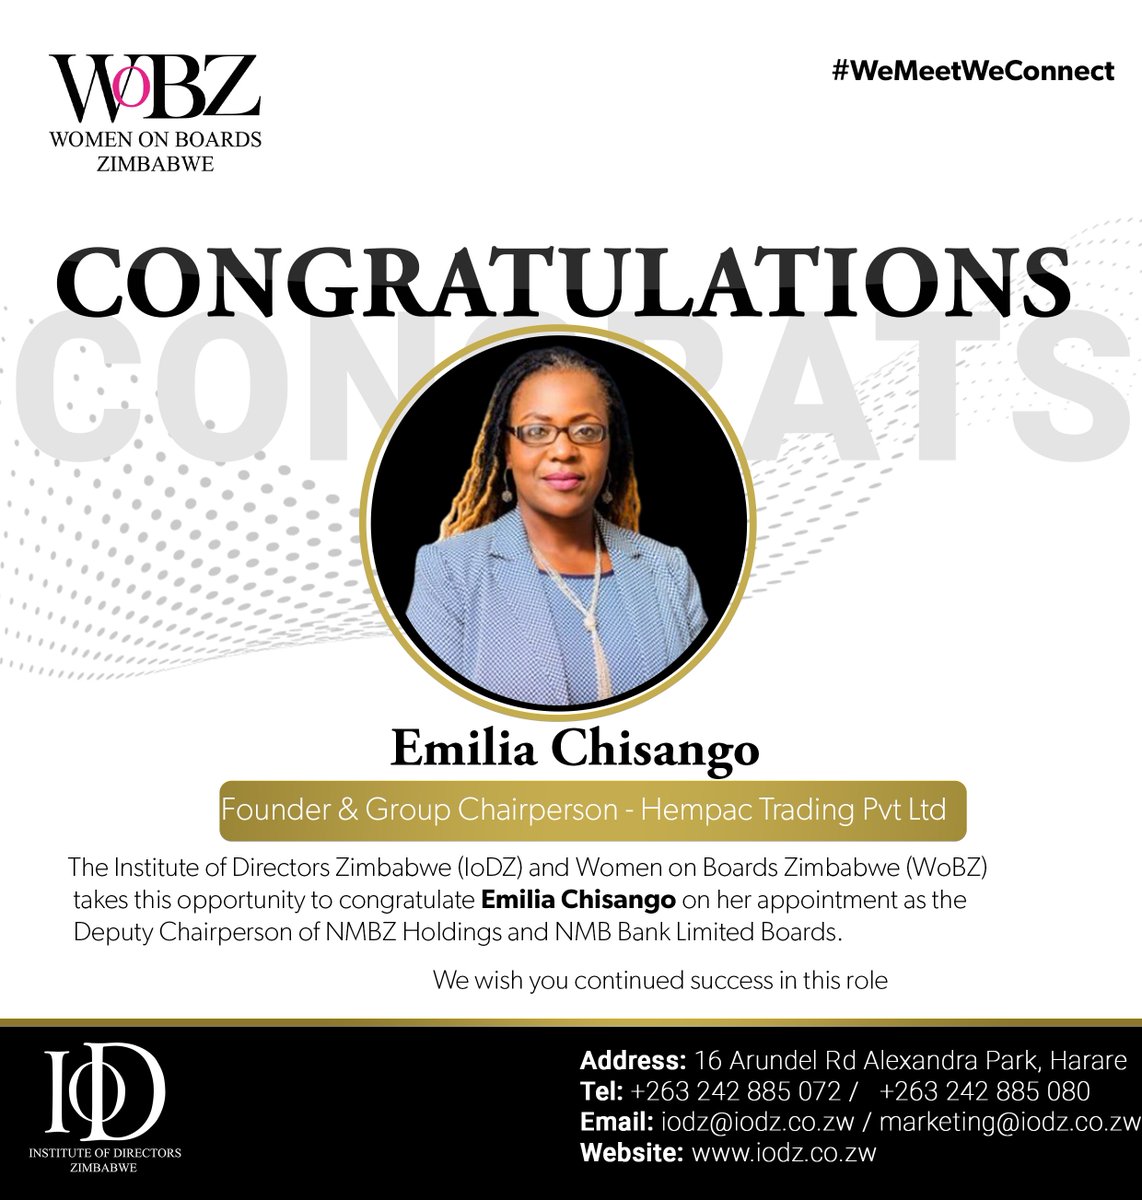 The Institute of Directors Zimbabwe (IoDZ) extends its heartfelt congratulations to Emilia Chisango on her recent appointment as the Deputy Chairperson of the NMBZ Holdings and NMB Bank Limited Boards. We would like to take this opportunity to wish her the best of luck.